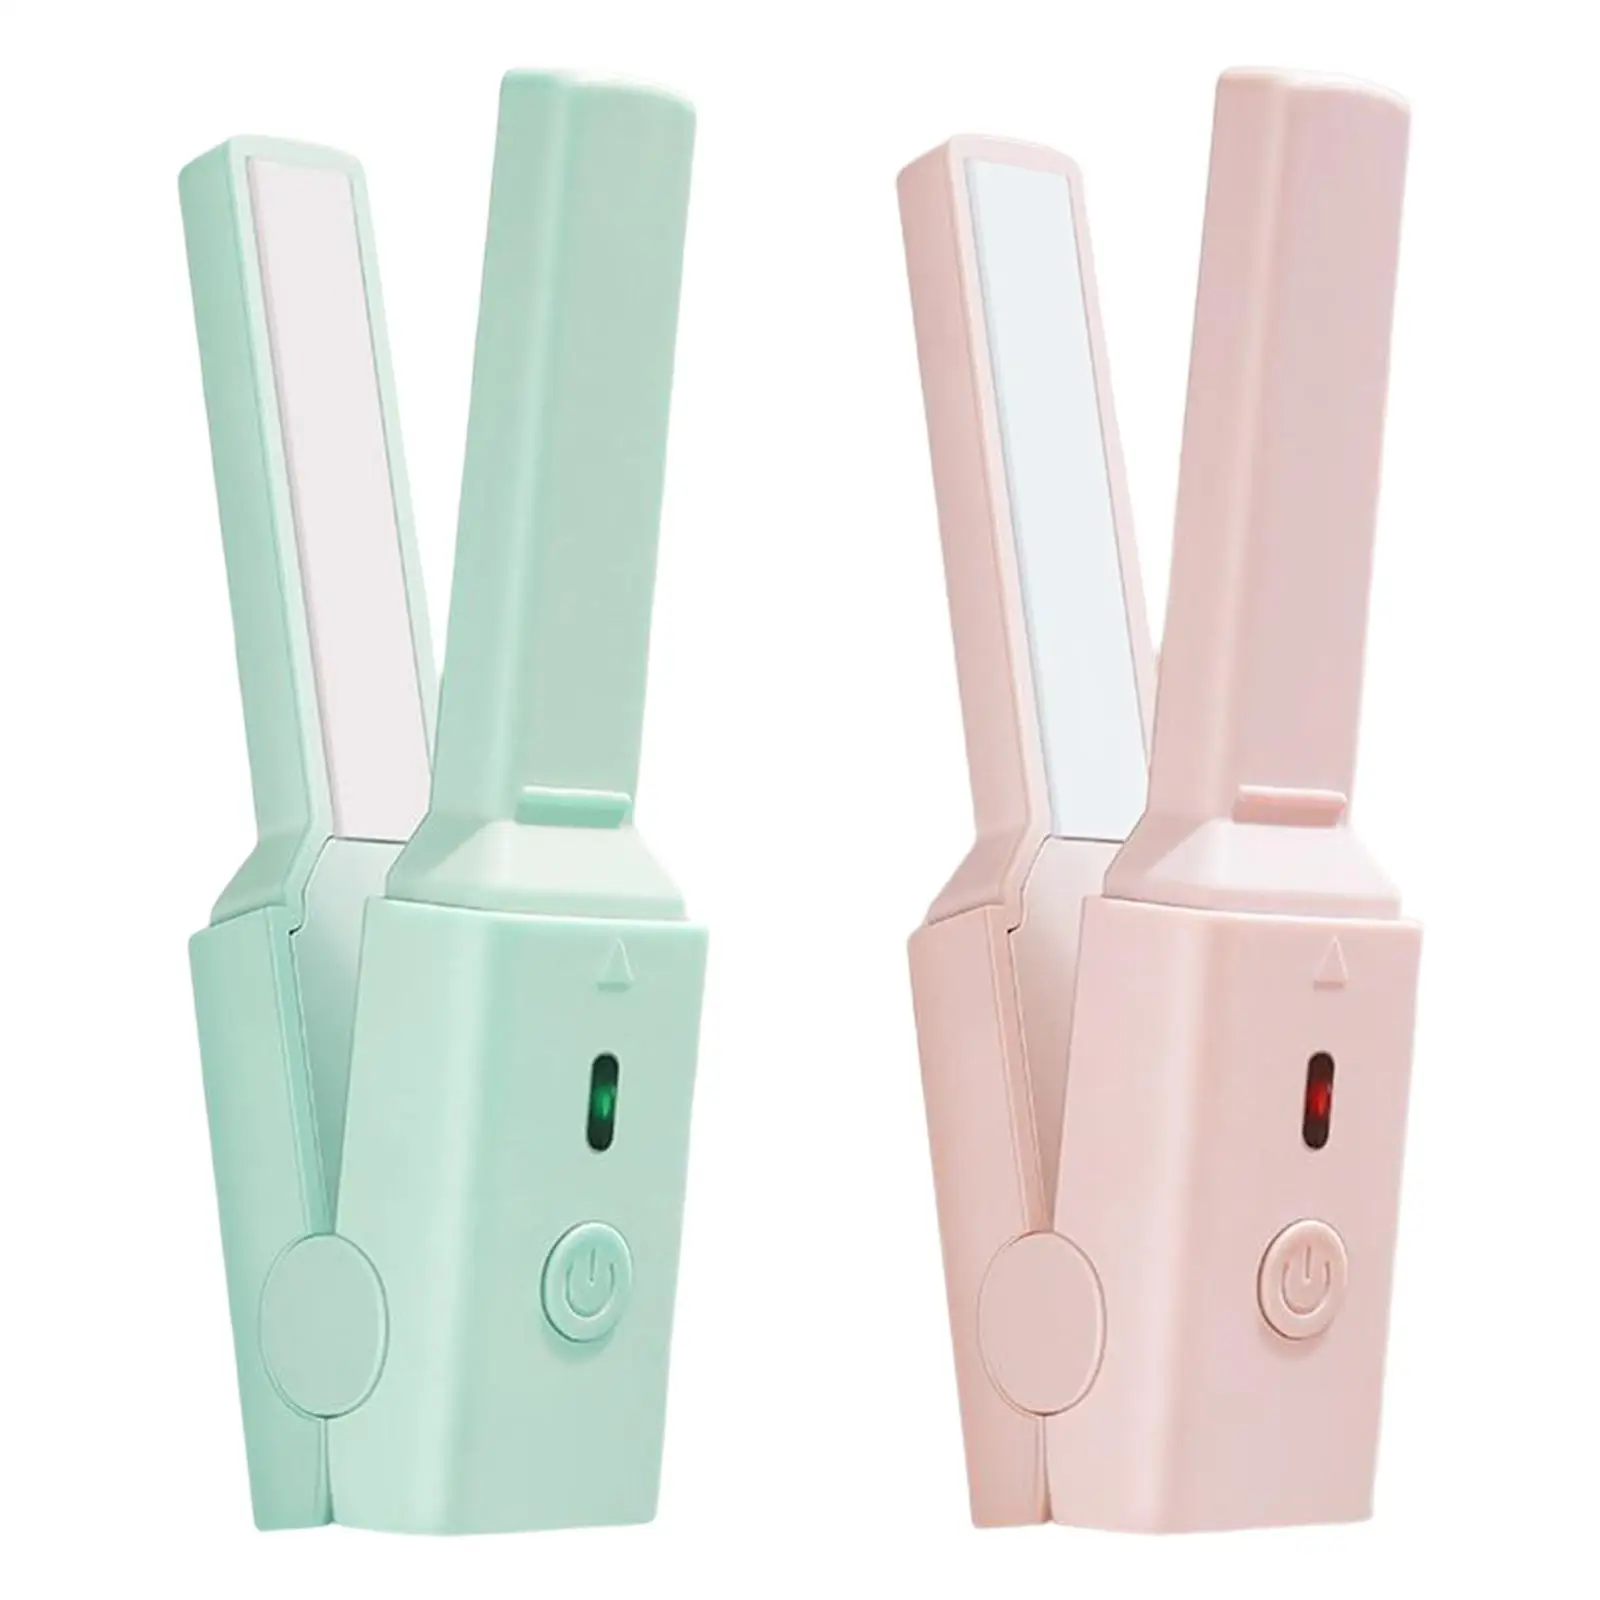 Hair Straightener and Curler Mini Size USB for Styling Tool Home Wavy Hair